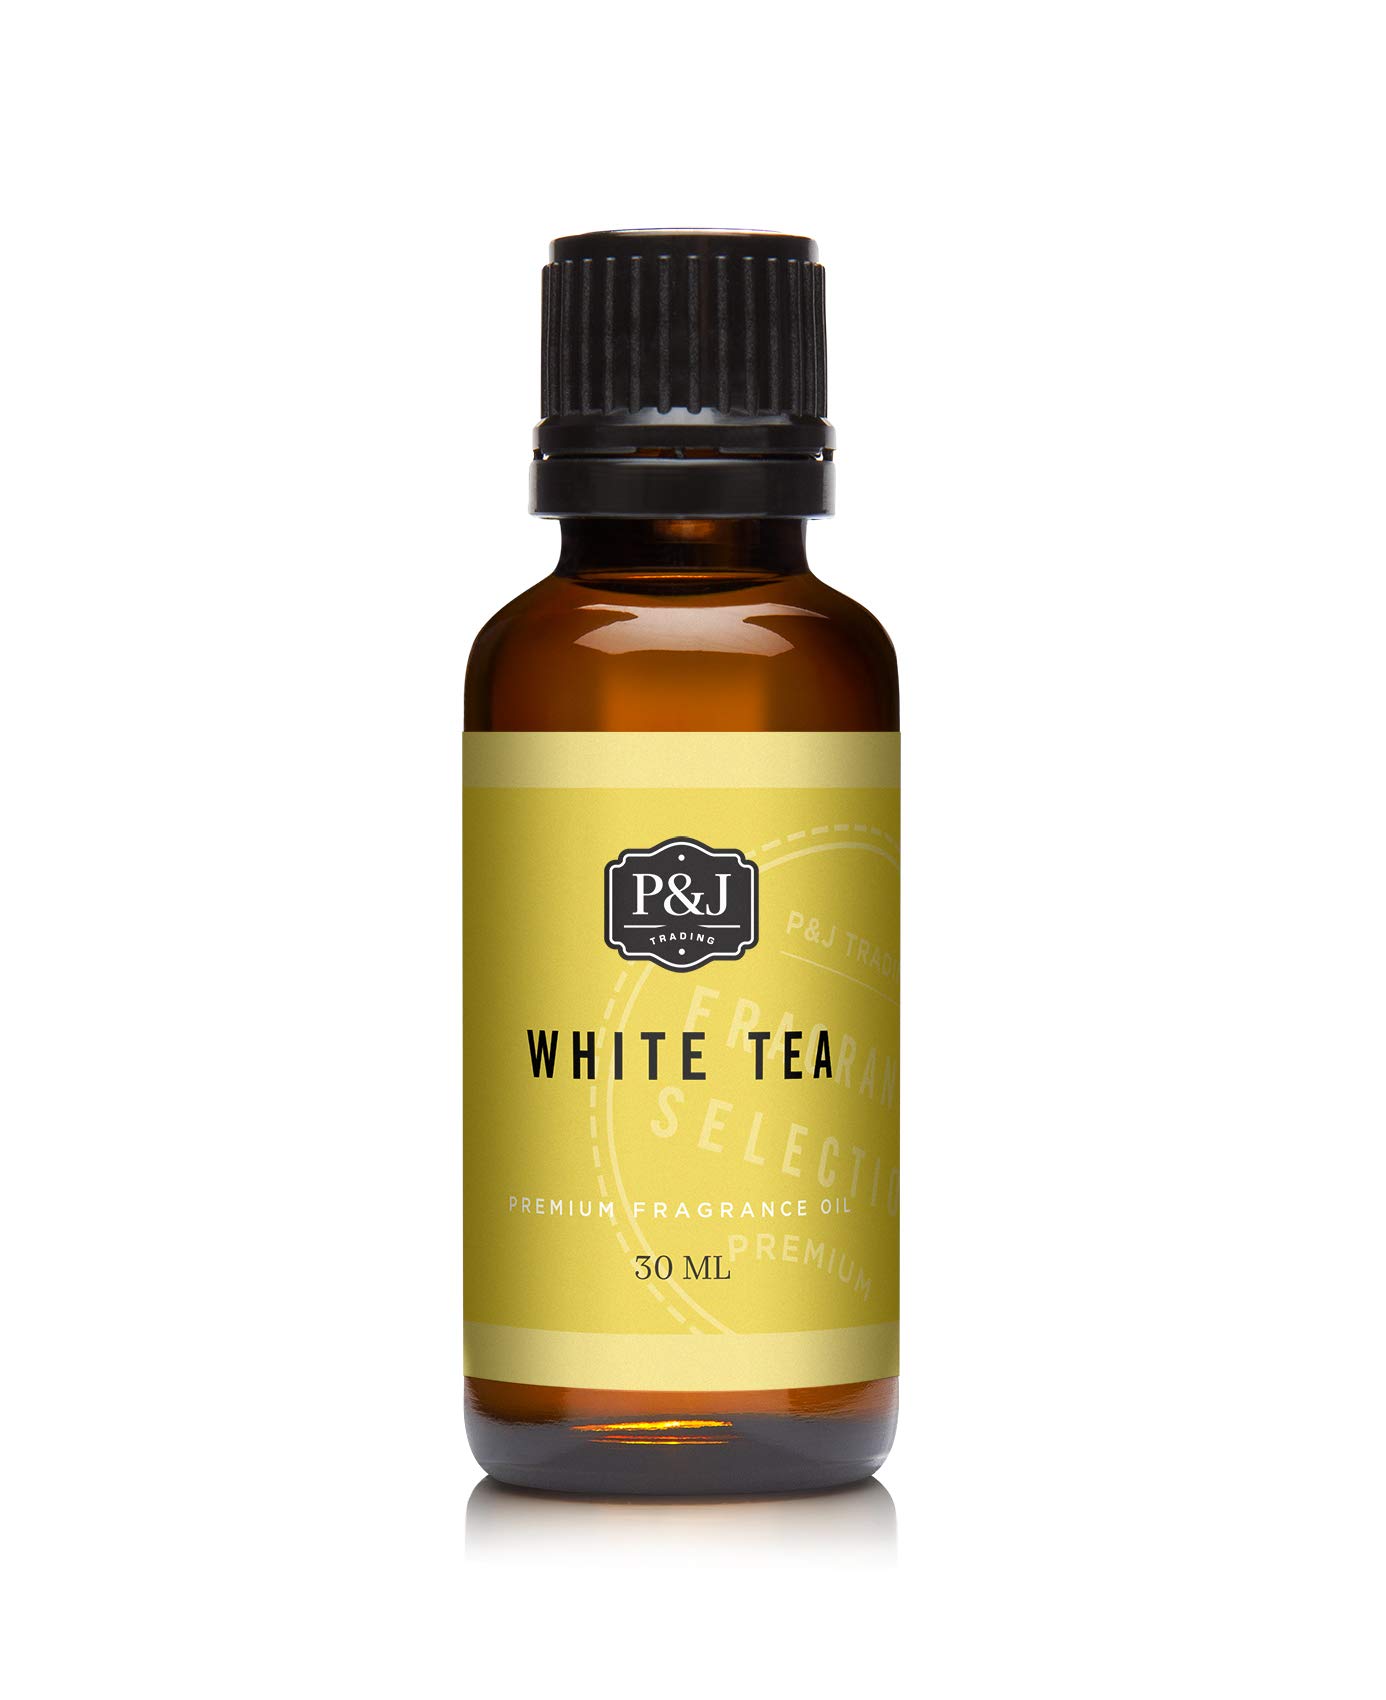 P&J Fragrance Oil  White Tea Oil 30ml - Candle Scents for Candle Making Freshie  Scents Soap Making Supplies Diffuser Oil Scents White Tea 1 Fl Oz (Pack of  1)